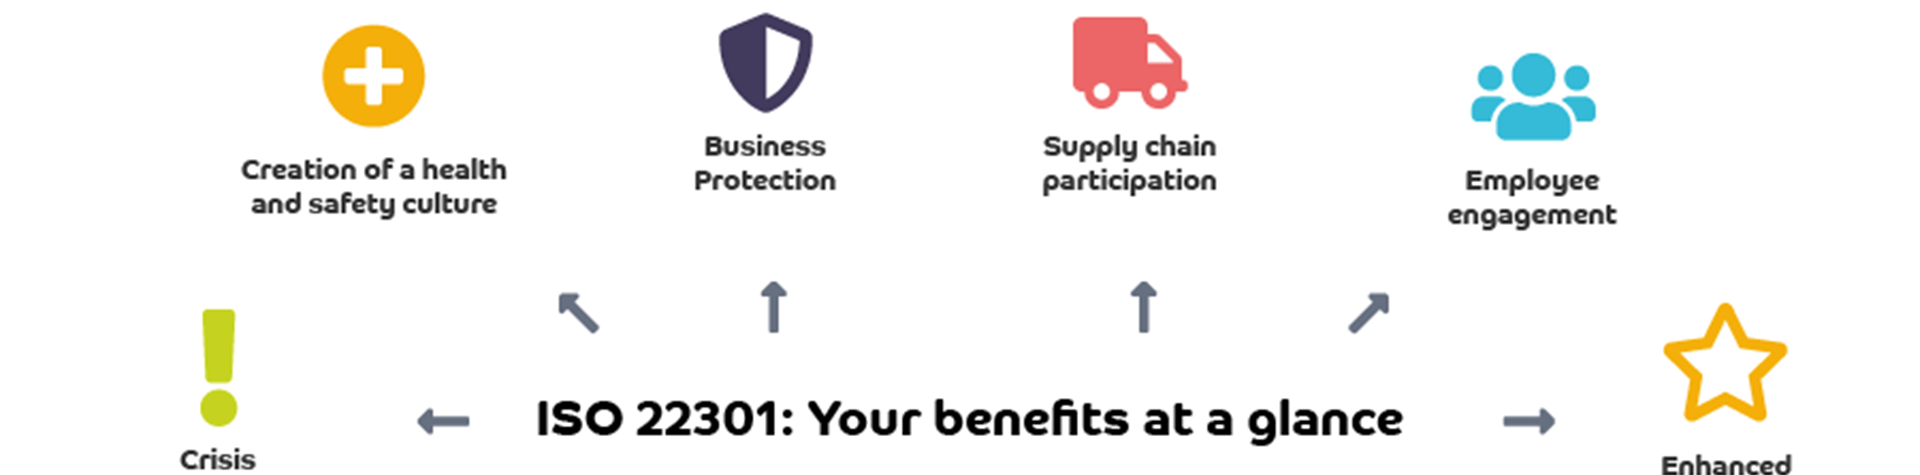 What are the benefits of ISO22301?